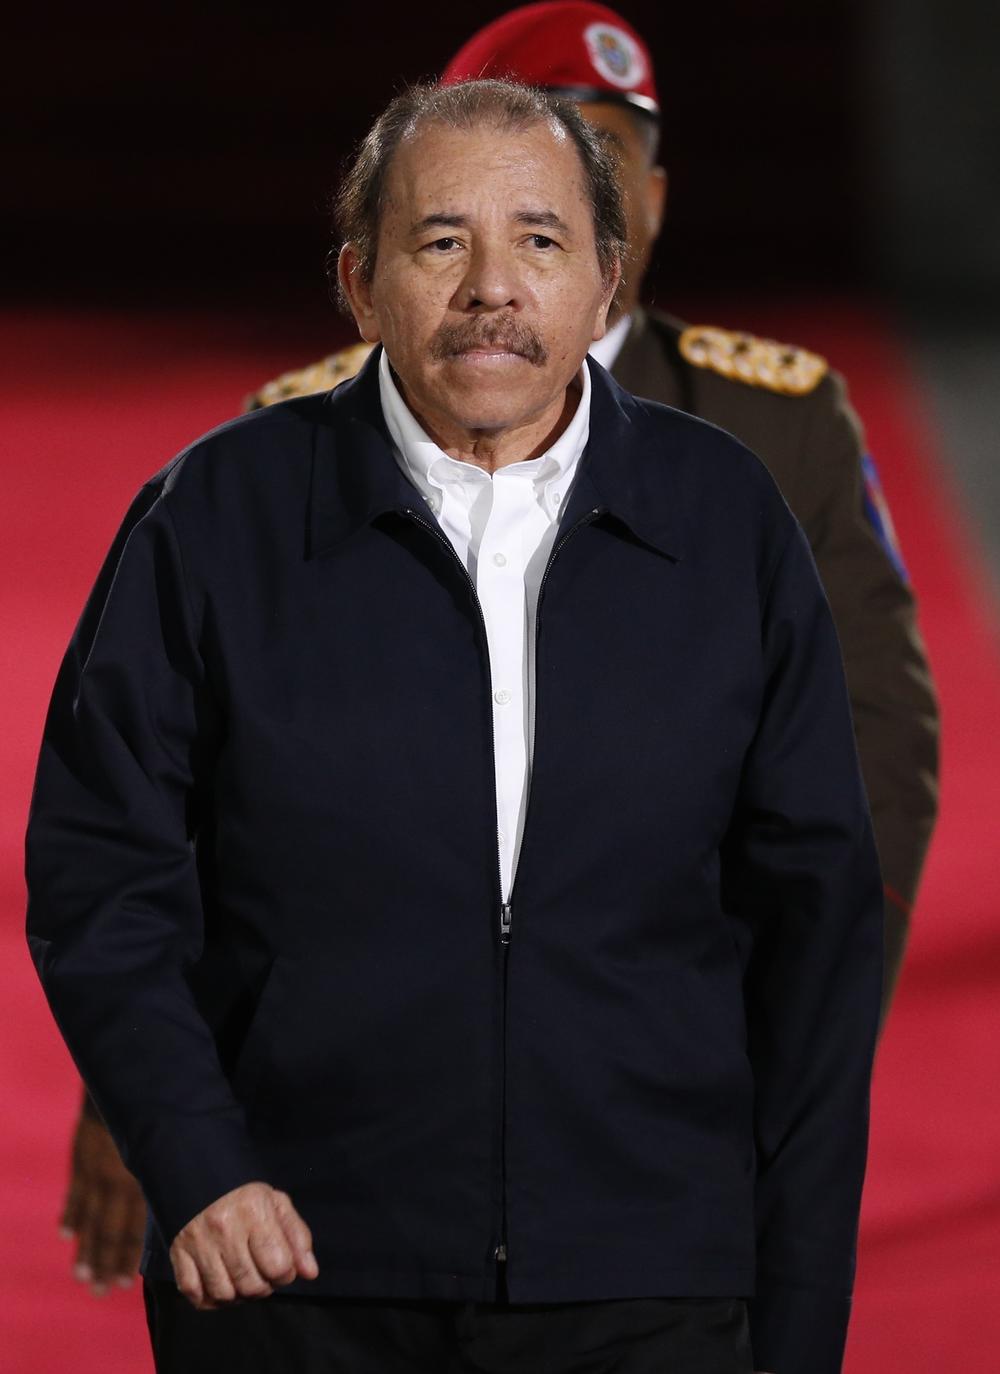 Nicaragua's President Daniel Ortega in 2019 on a visit to Venezuela. Ortega's regime has arrested dozens of perceived political opponents in the runup to this year's presidential election.